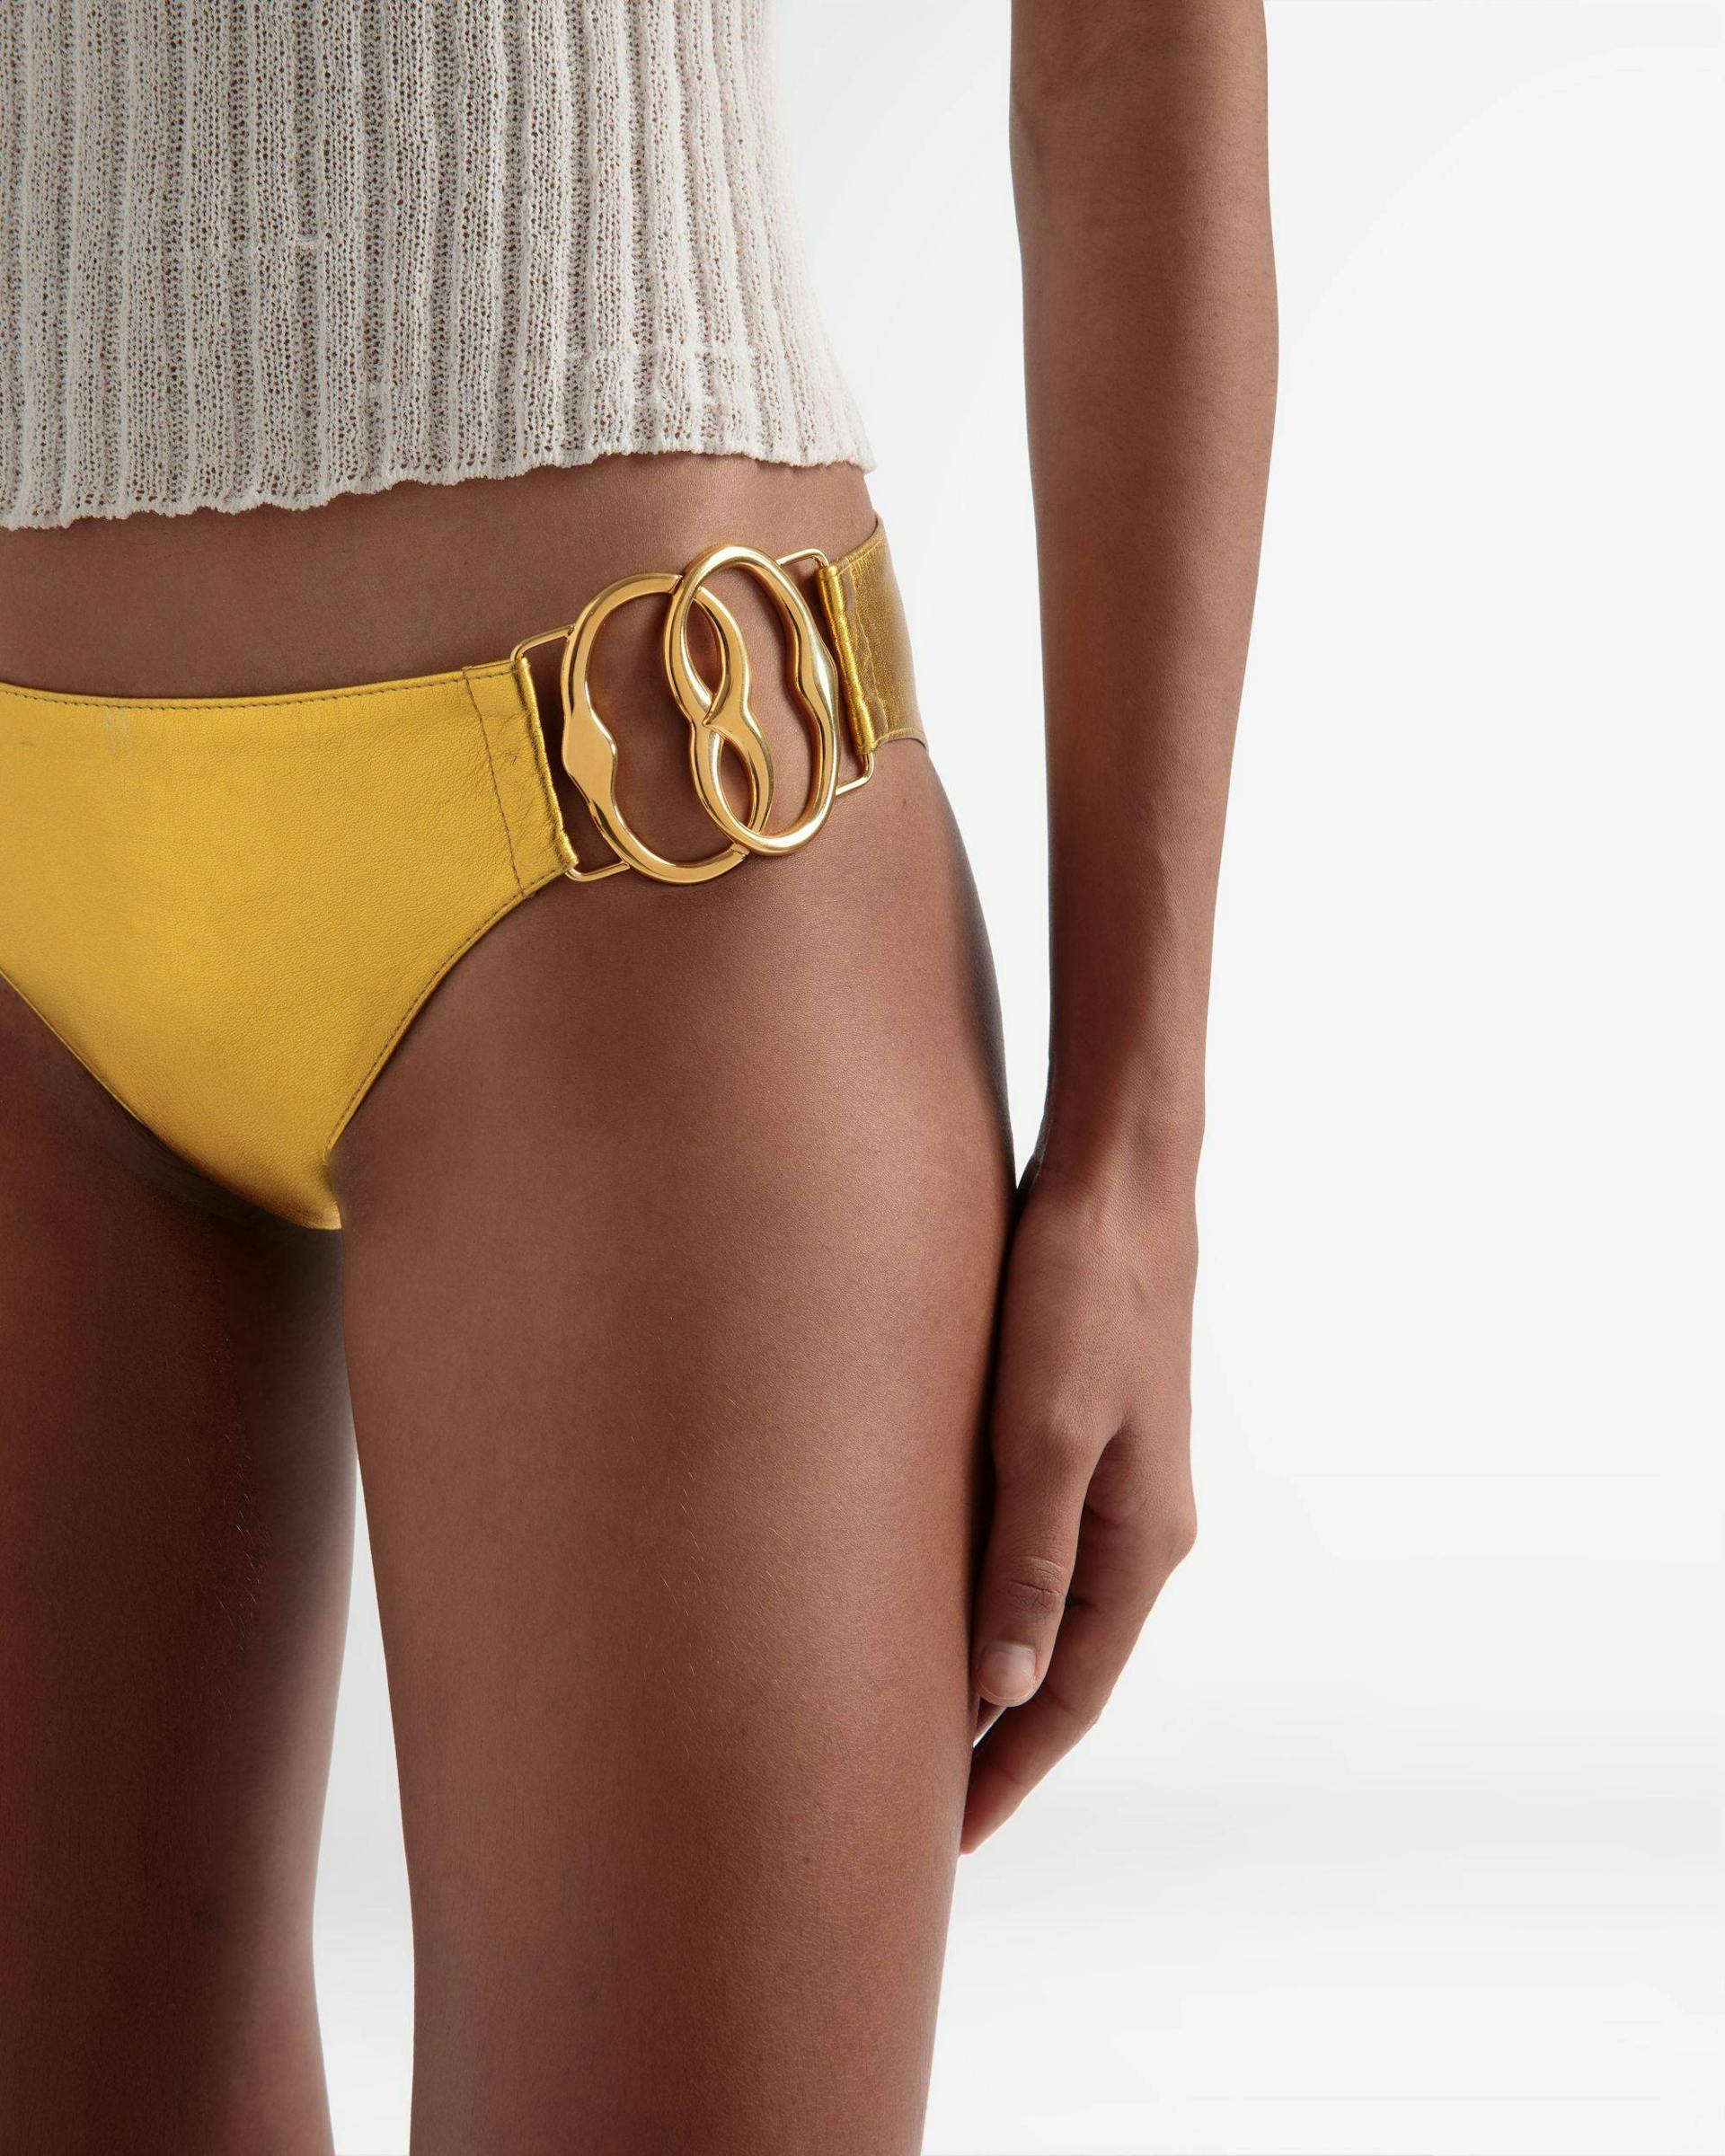 Leather Panties In Gold - Women's - Bally - 03